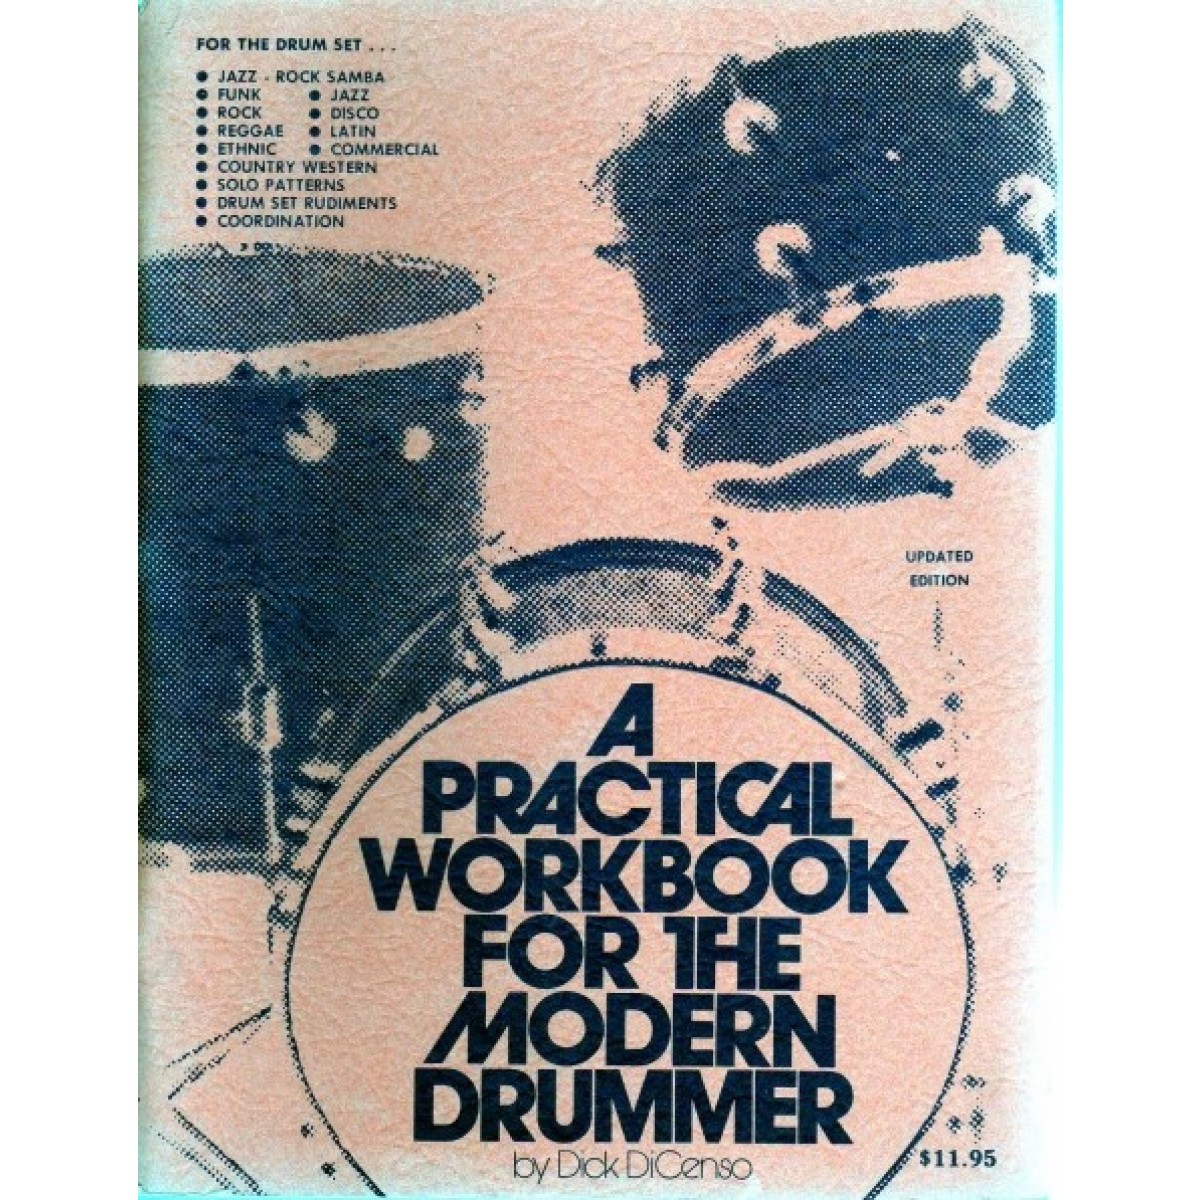 A Practical Workbook For The Modern Drummer